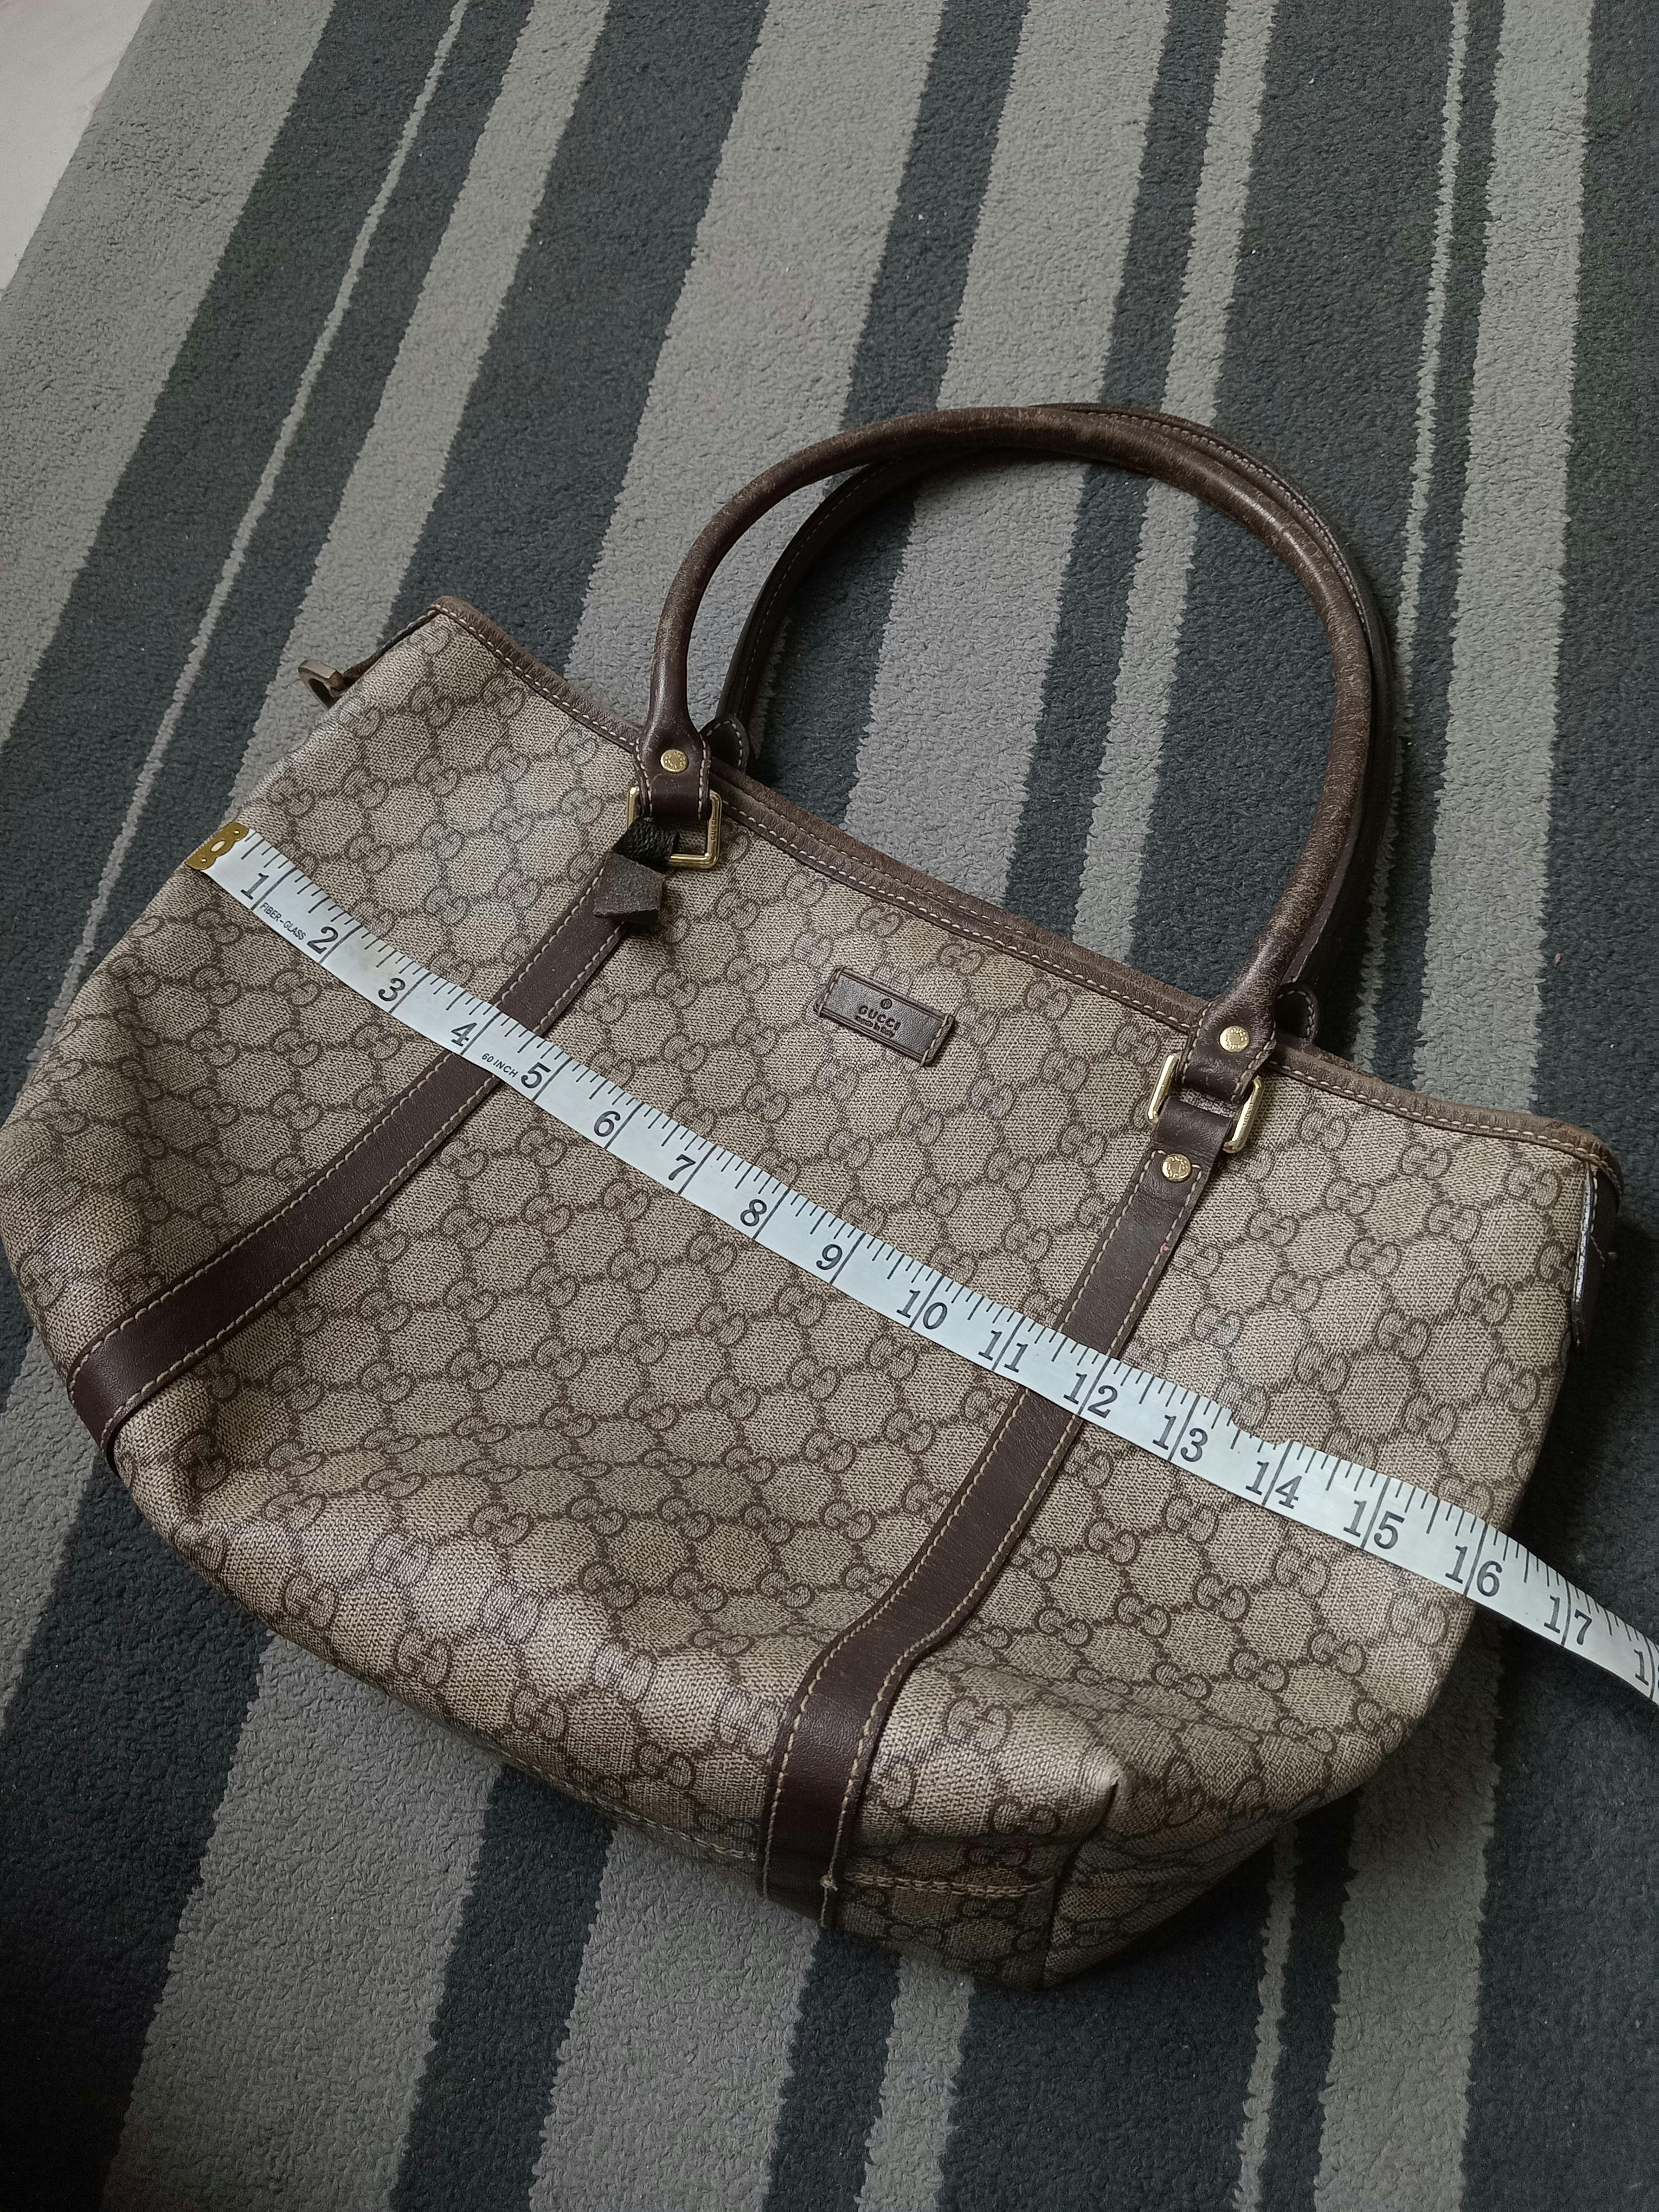 Authentic Gucci GG Canvas Beige Brown Tote Bag - 9